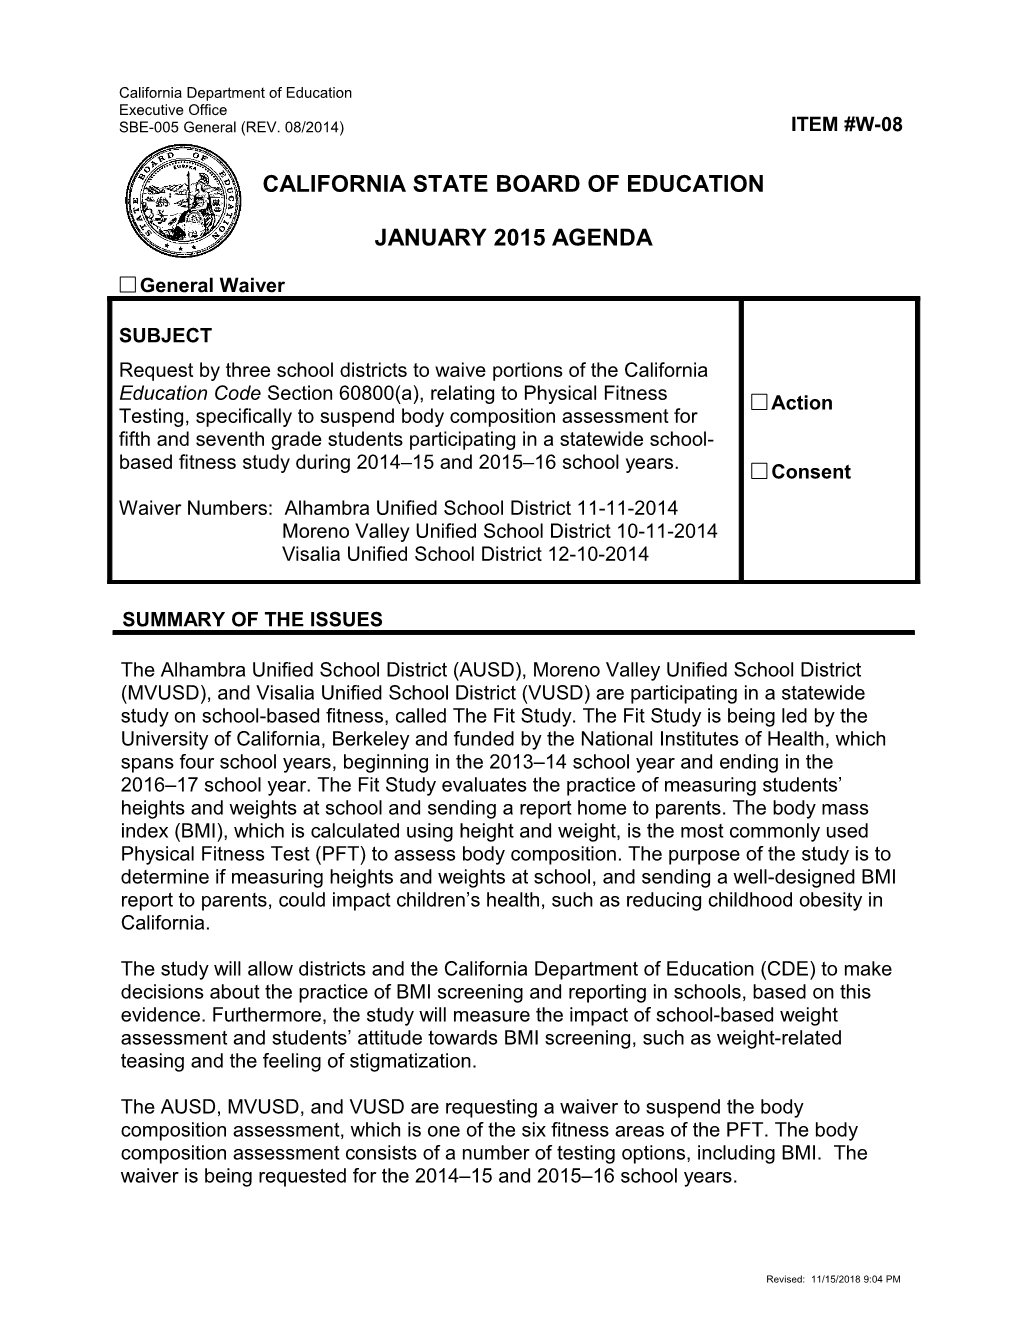 January 2015 Waiver Item W-08 - Meeting Agendas (CA State Board of Education)